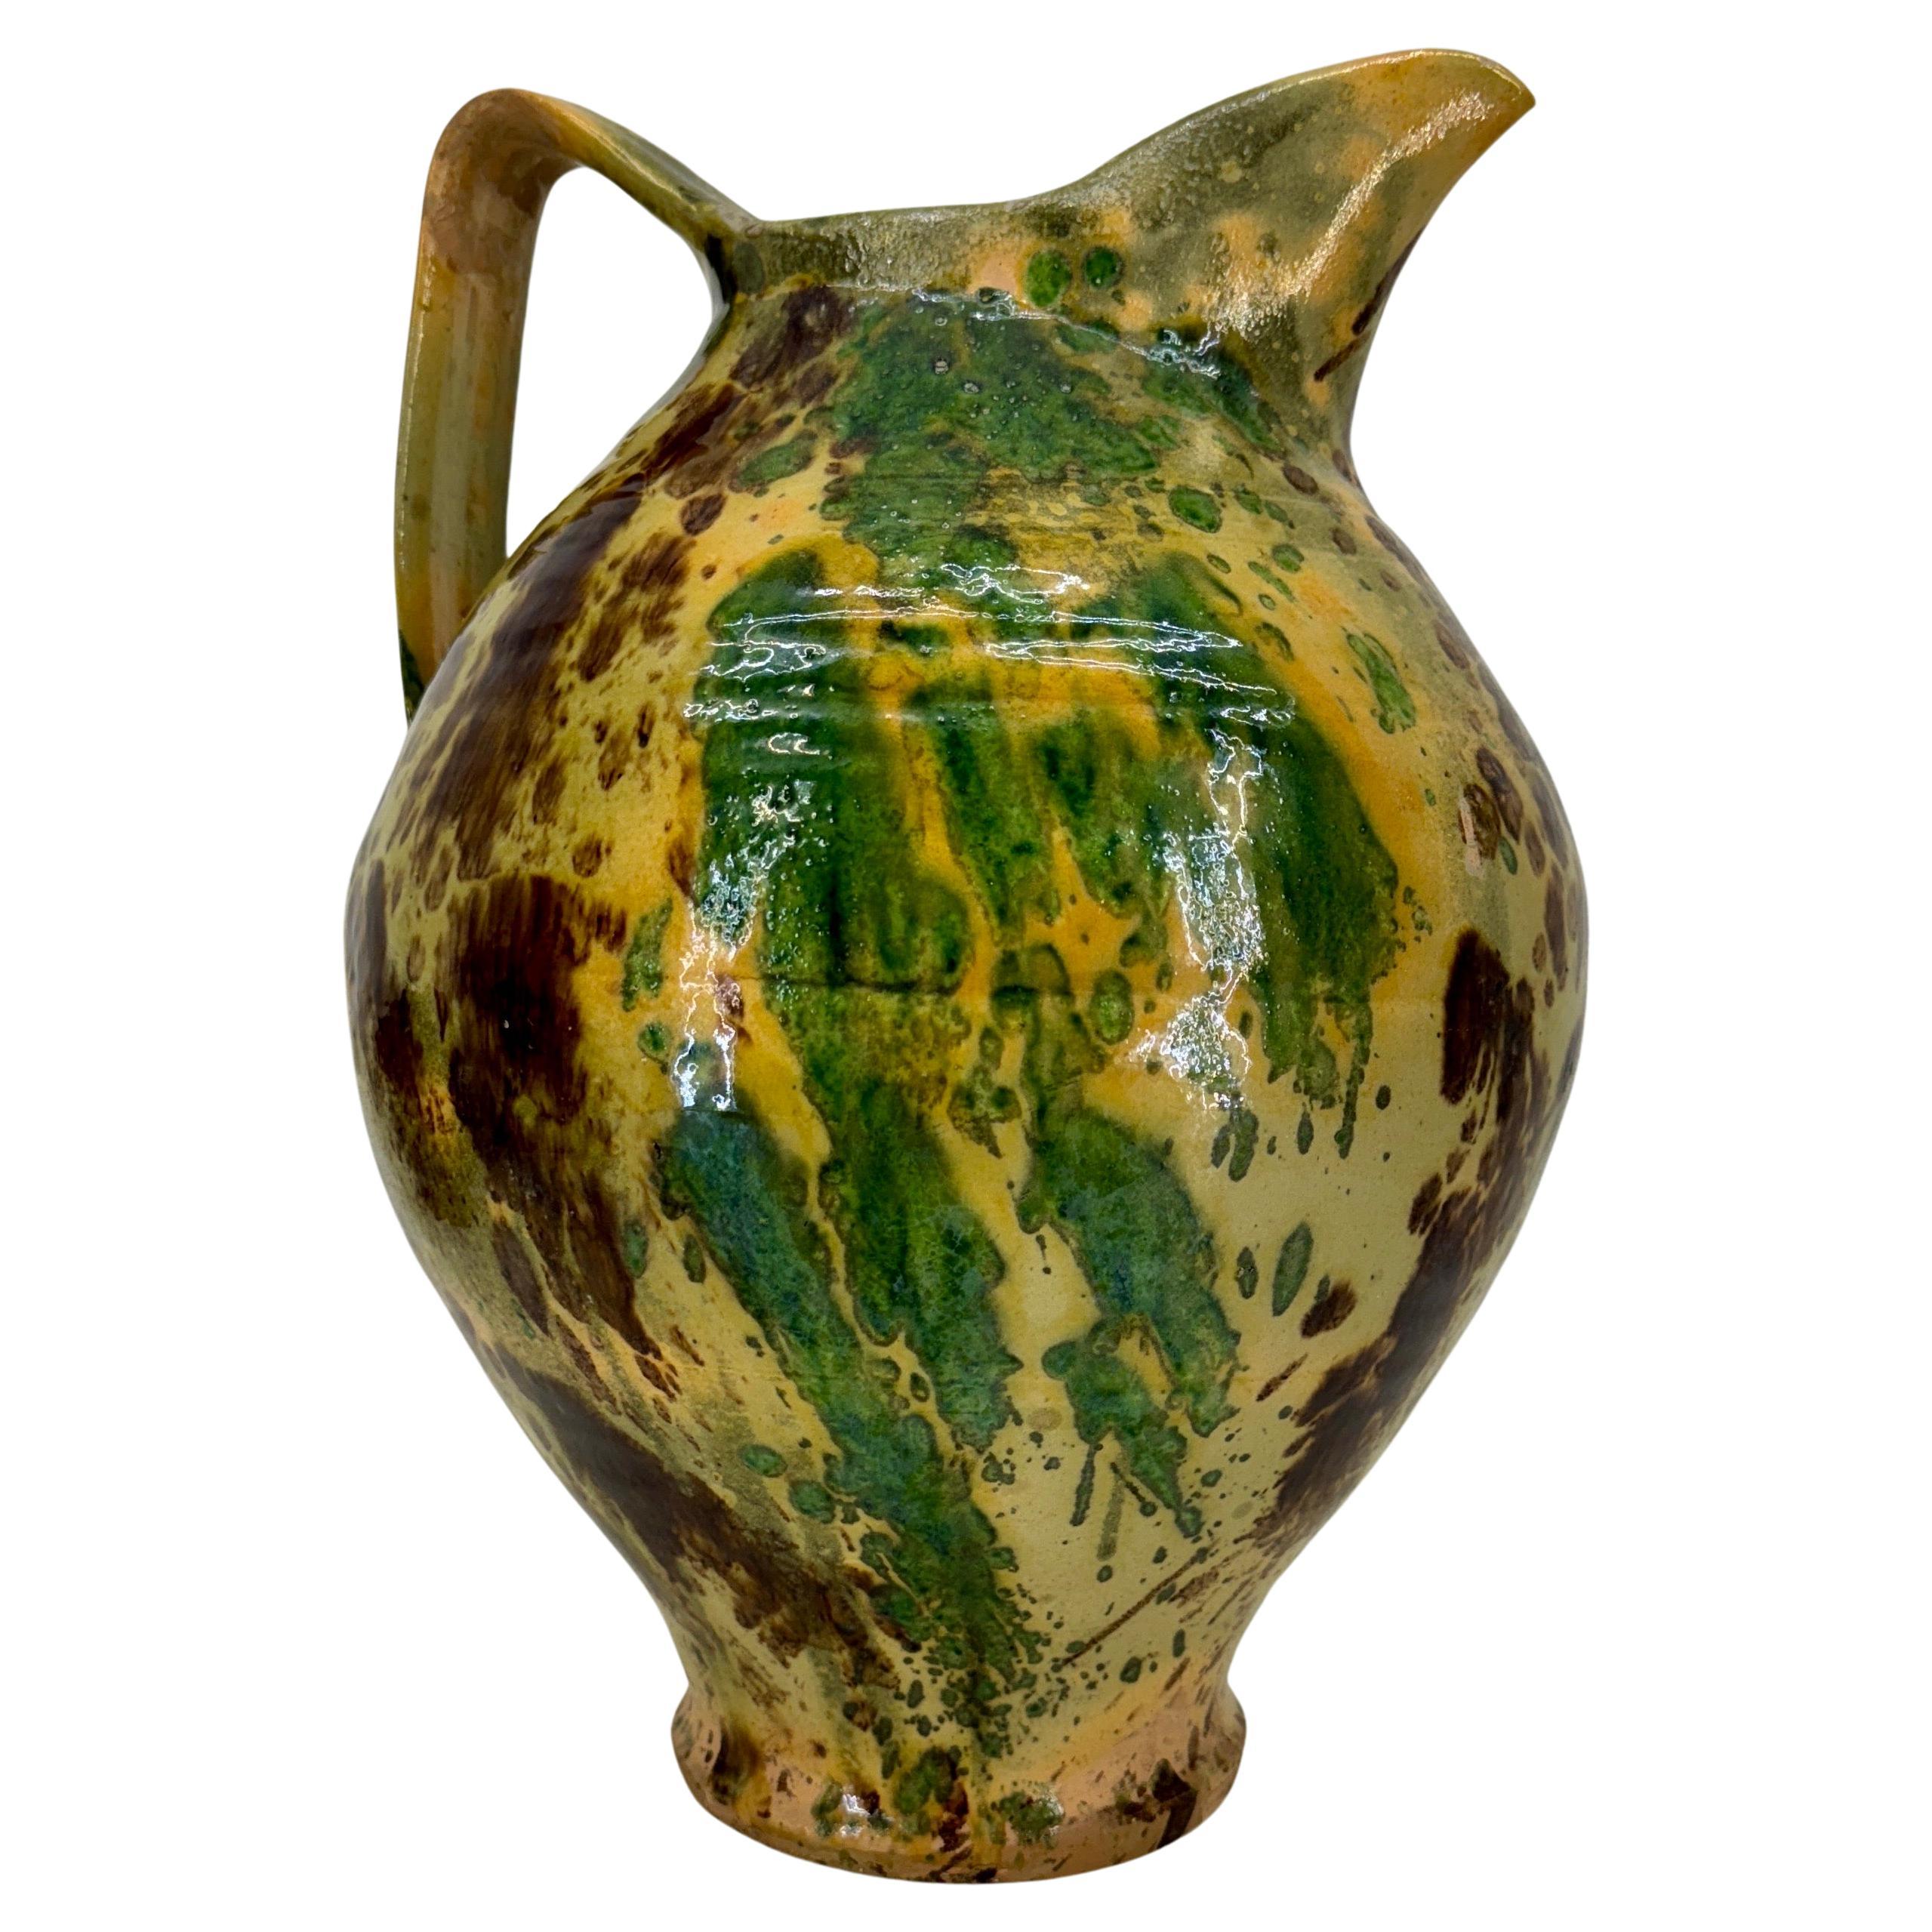 Antique Pottery Jaspe Multicolored Pitcher with Handle, France

Large French pitcher in terracotta with yellows, browns and greens with a marbleized glaze. The pottery piece has one large handle, oversized spout and expresses a lovely glazed finish